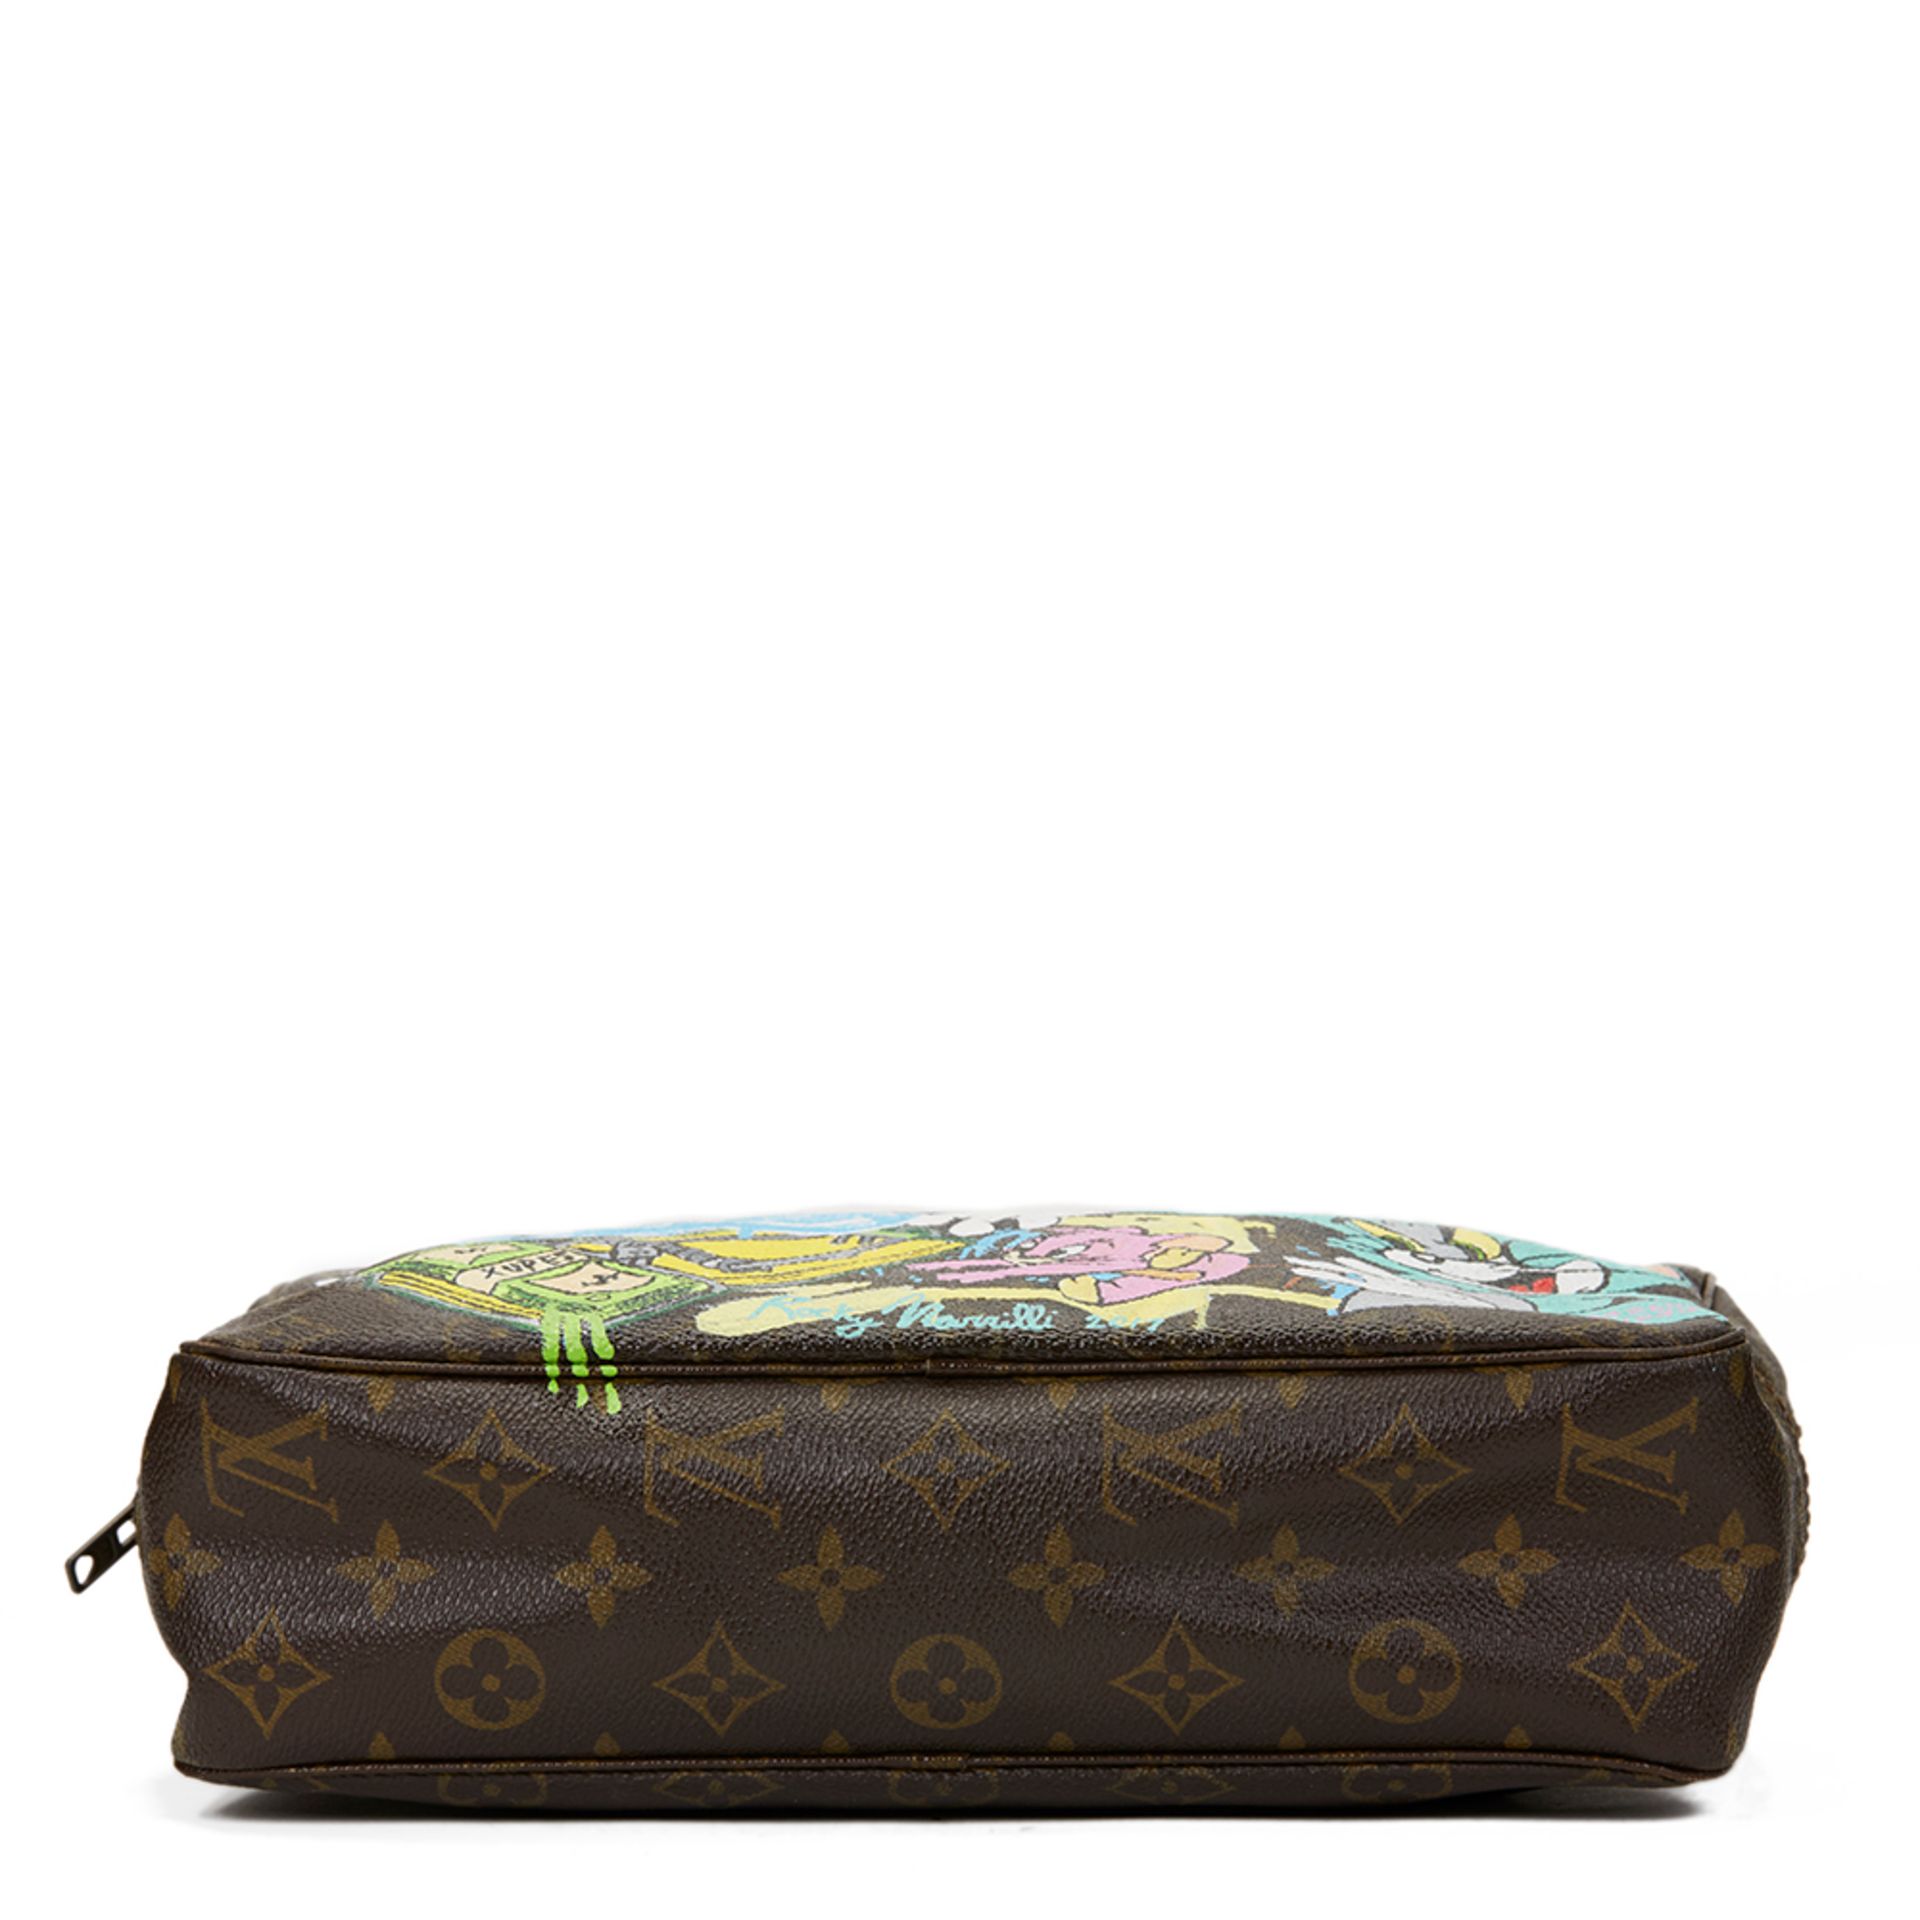 Louis Vuitton Hand-Painted 'Get This Money' X Year Zero London Toiletry Pouch - Image 5 of 9